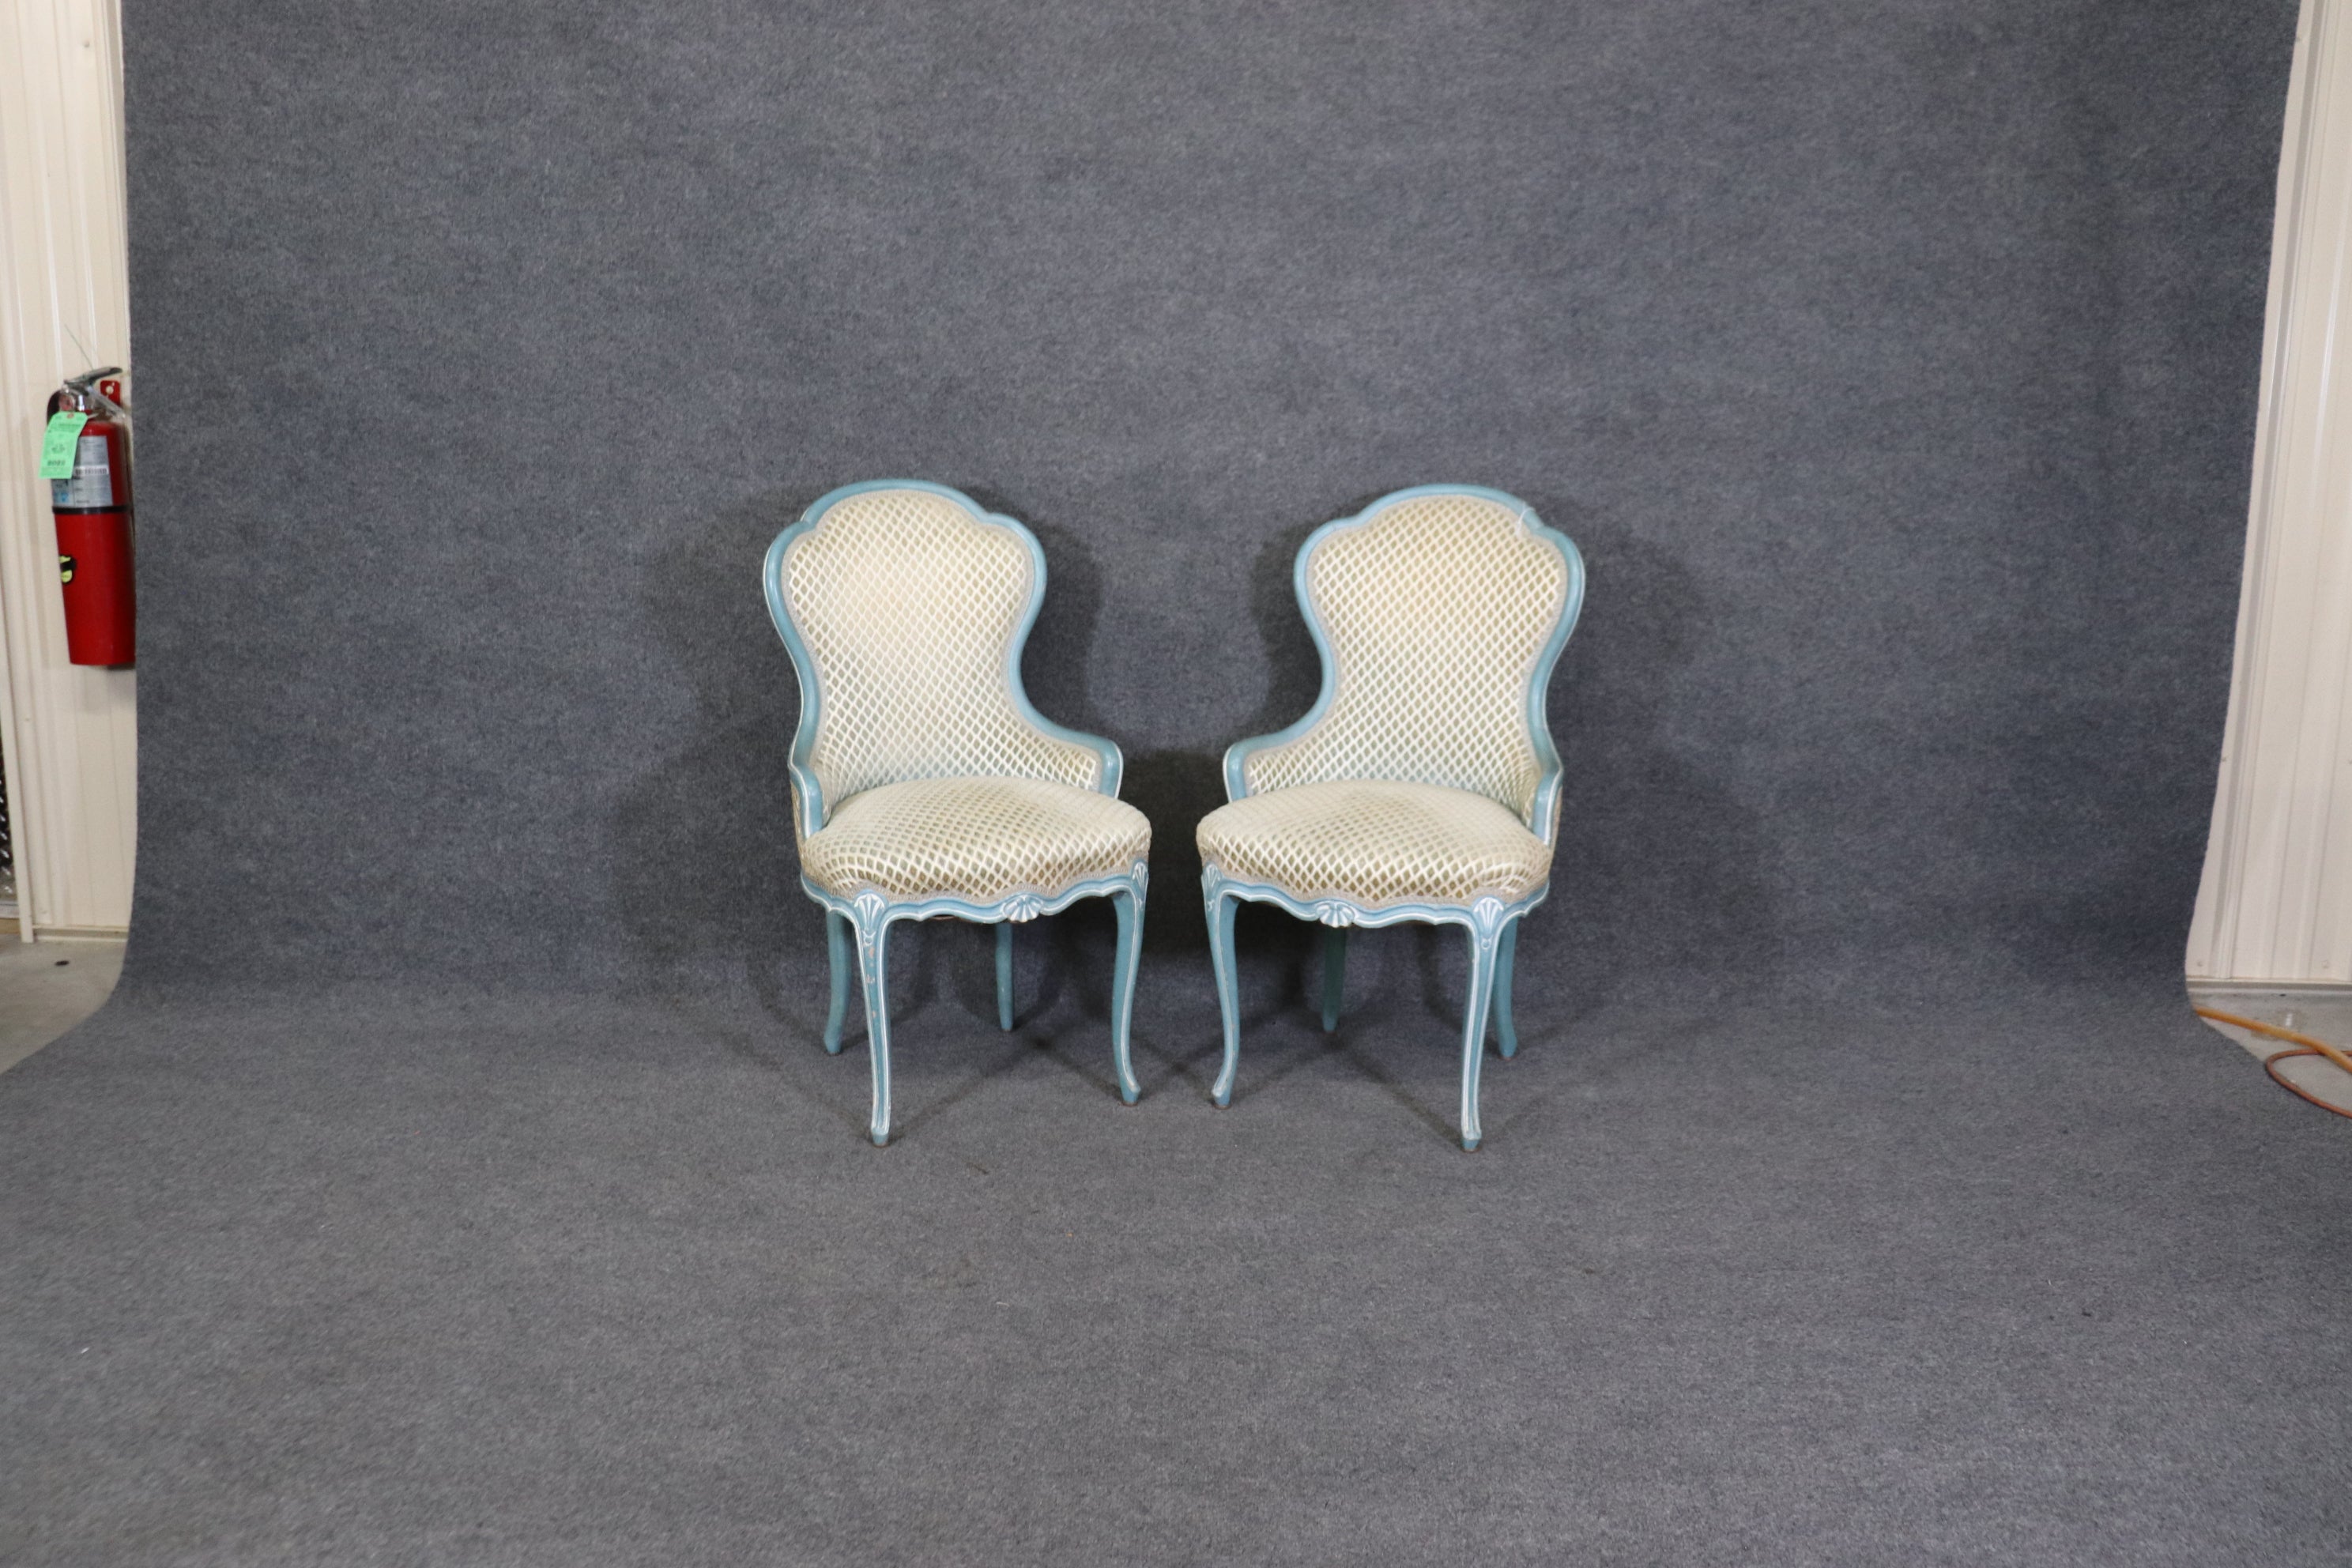 These are gorgeous chairs with fantastic painted frames in blue and white. The chairs date to the 1950s era and are in good vintage condition. The upholstery is early so expect signs of wear and use such as stains or wear. The chairs measure 36 tall